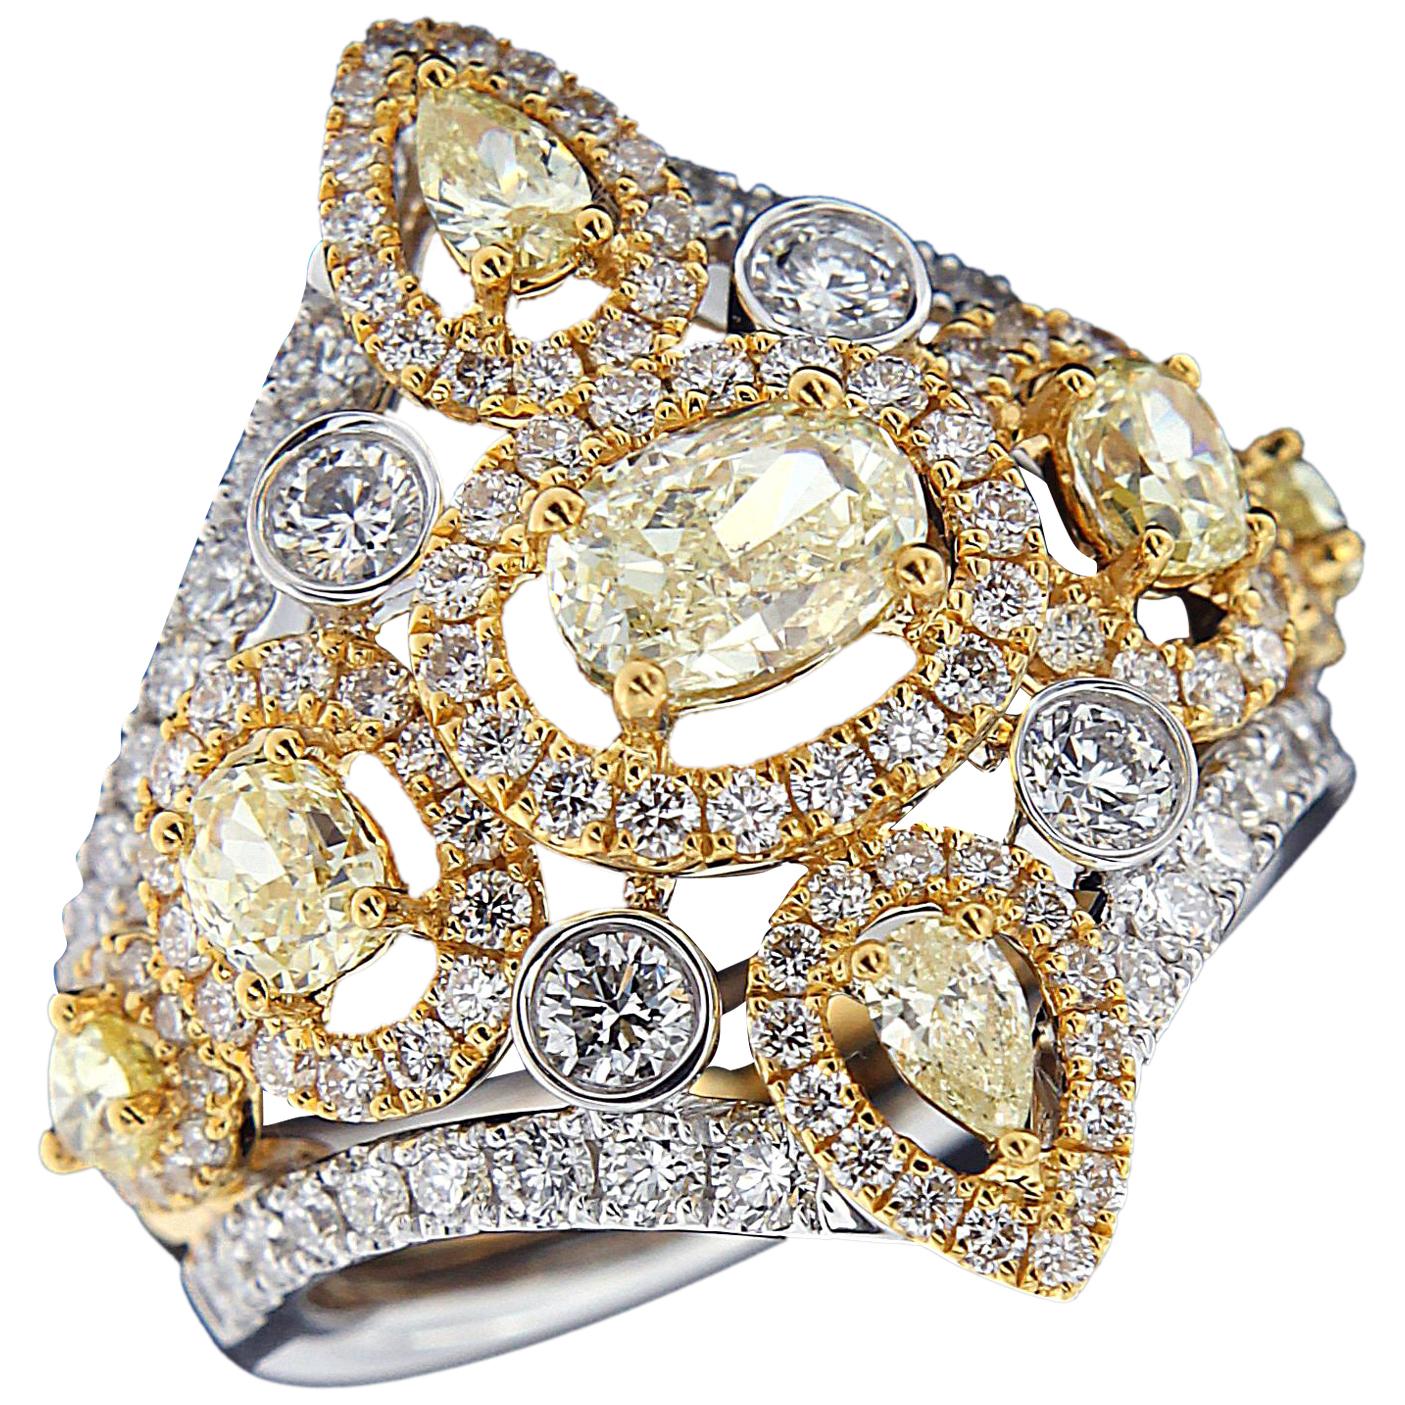 Magnificent 18 Karat White and Yellow Gold and Diamond Ring For Sale